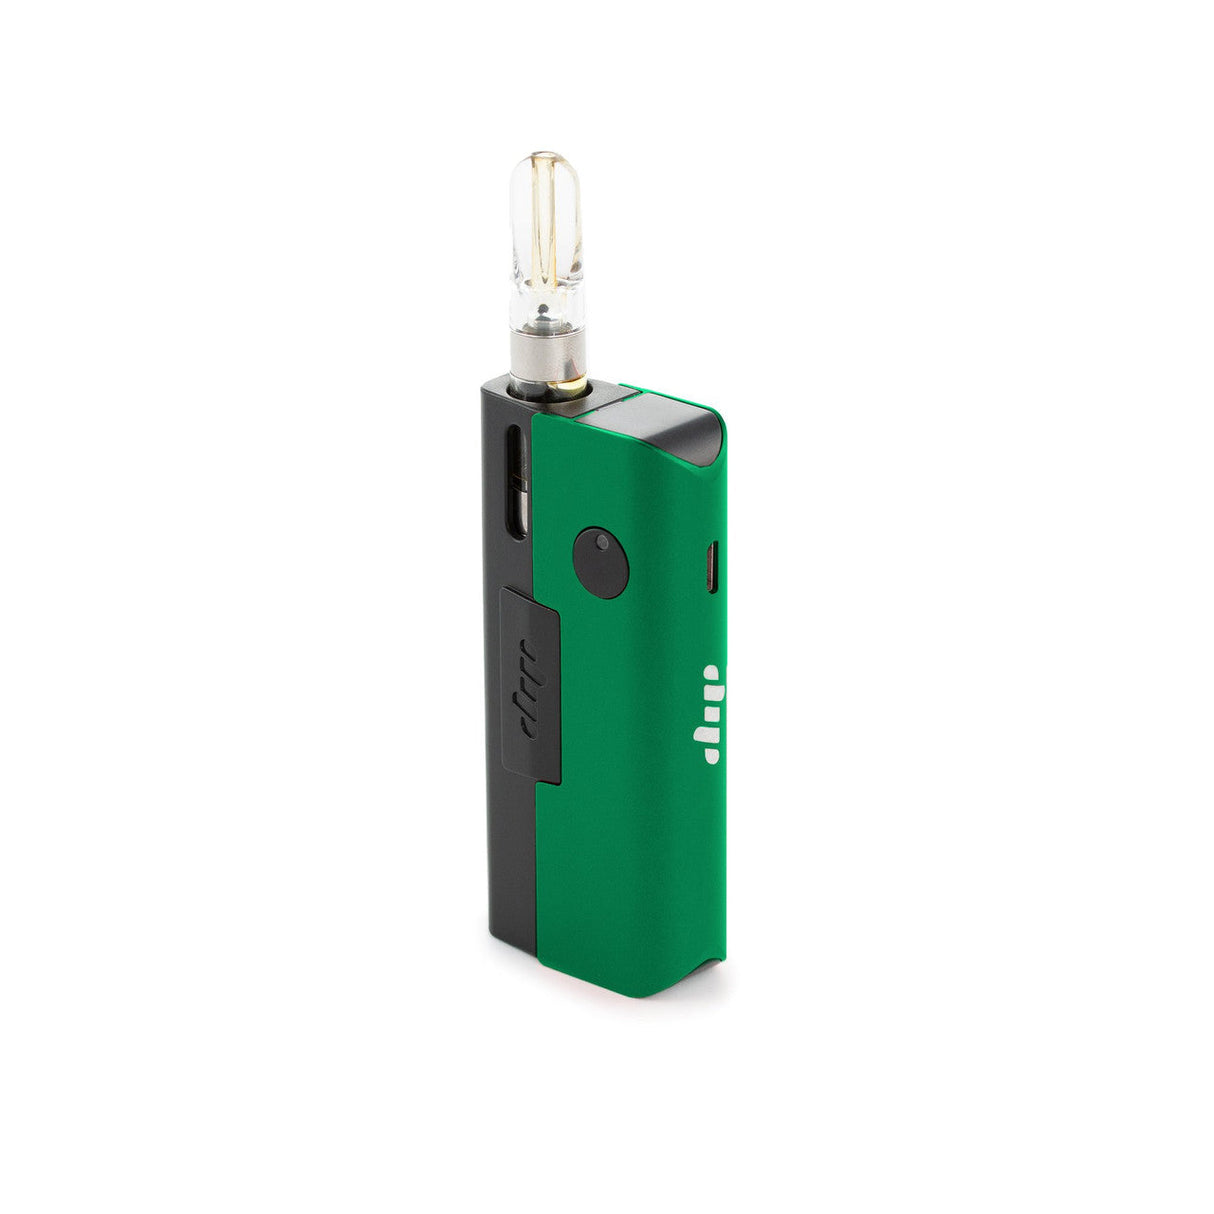 Evri Starter Kit by Dip Devices in green, front view, portable battery-powered vaporizer for concentrates